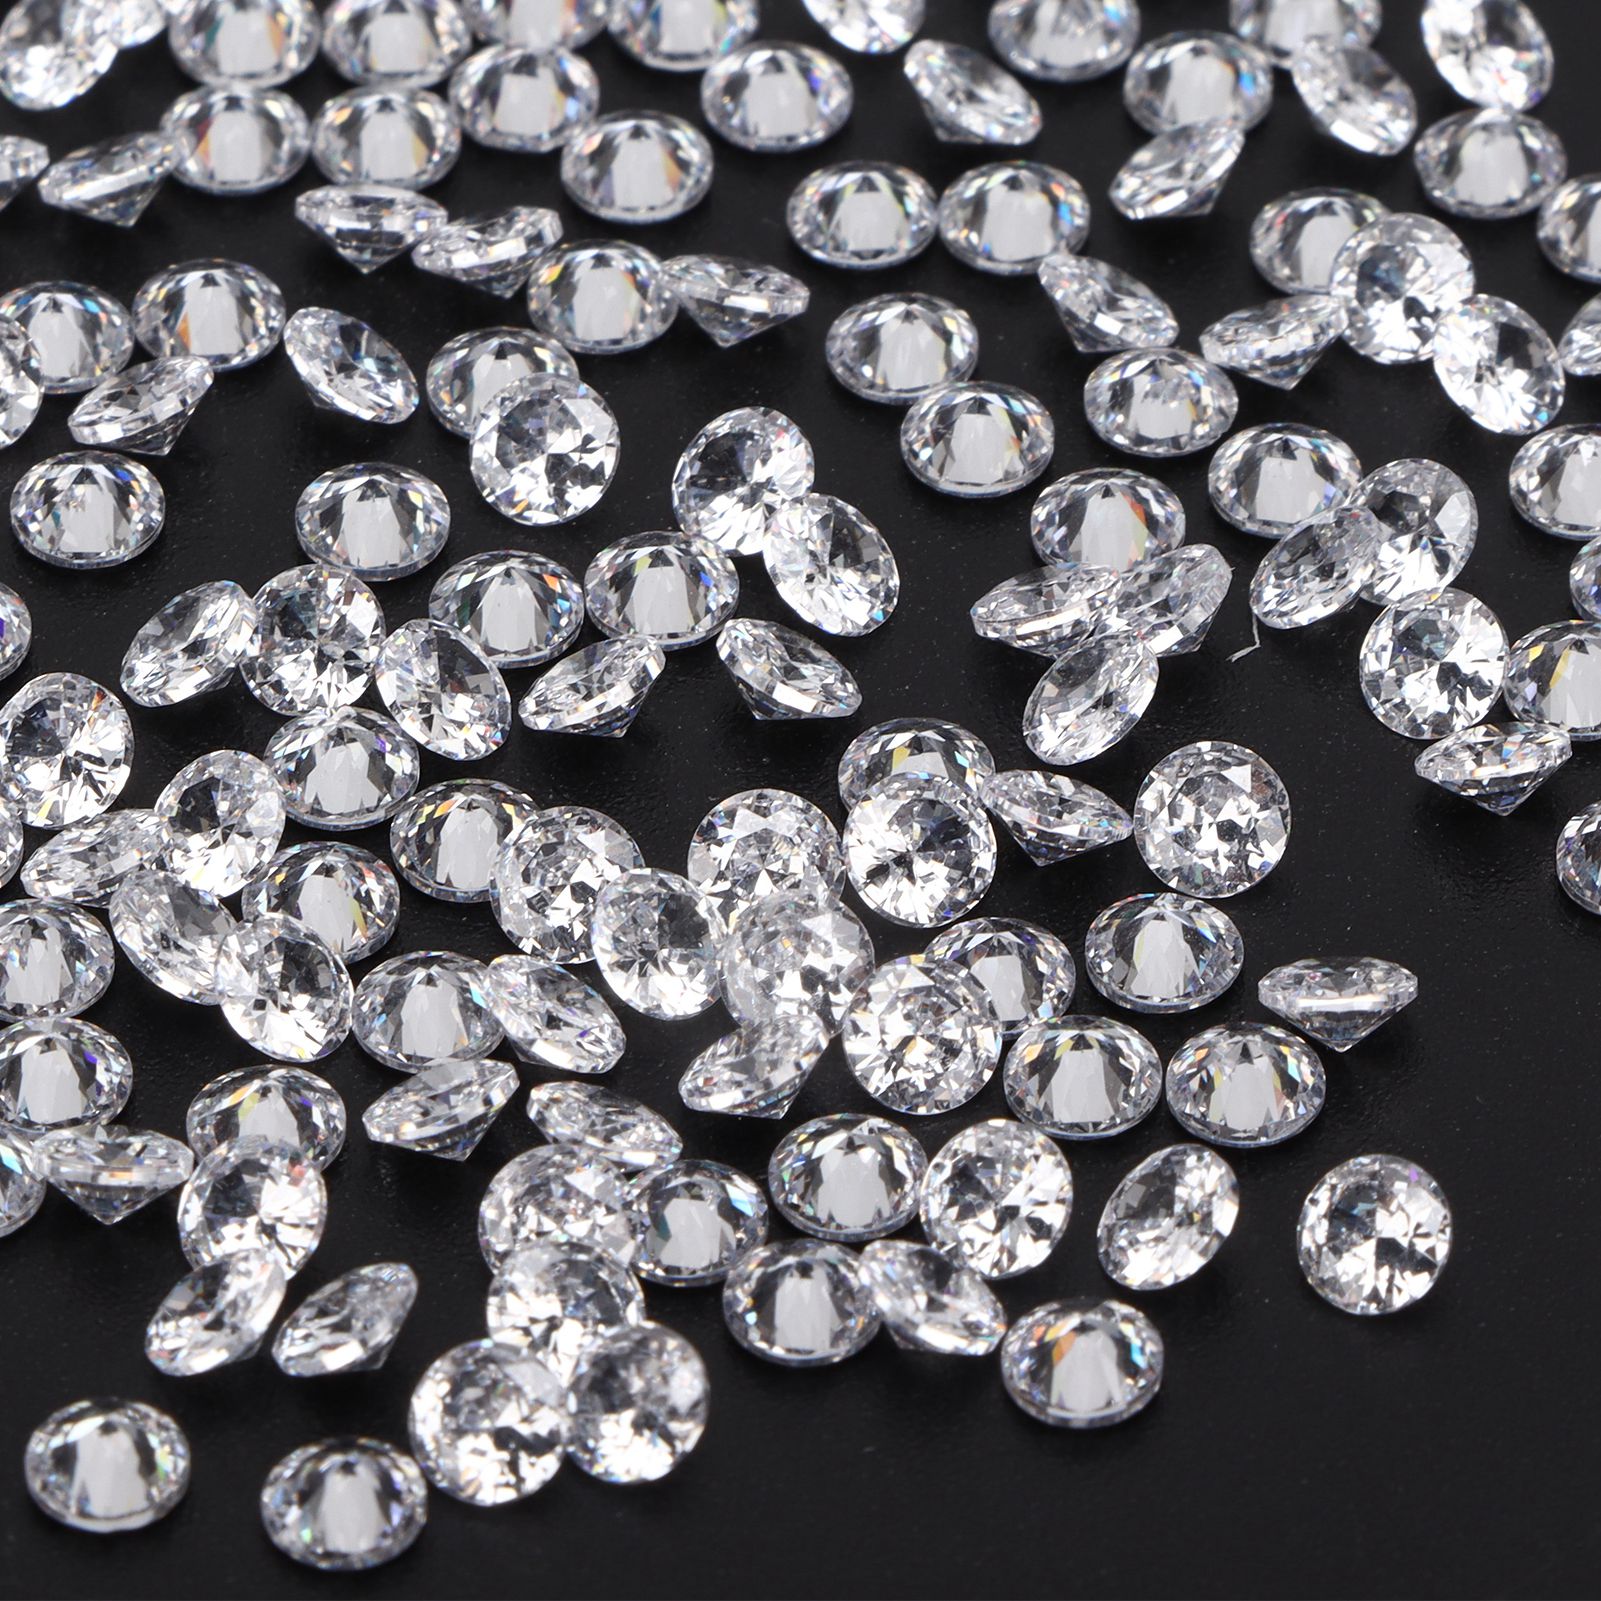 YLSHRF 200pcs Fake Diamonds 4mm Clear Crystals Acrylic Gems for Wedding,  Party, Jewelry & Crafts Decor 